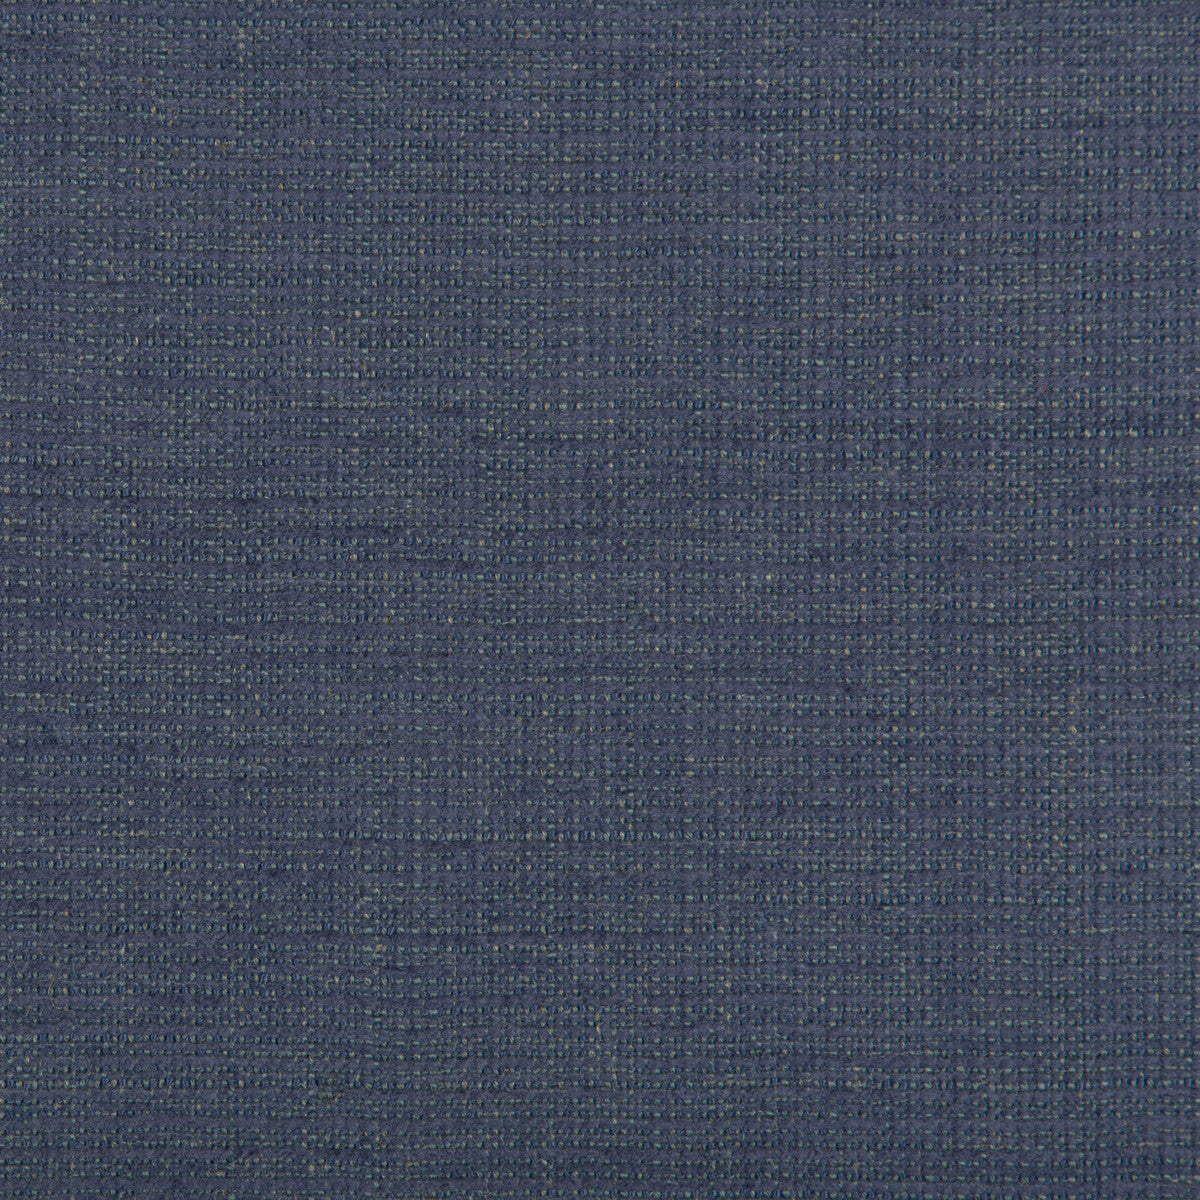 Kravet Smart fabric in 35395-5 color - pattern 35395.5.0 - by Kravet Smart in the Performance Crypton Home collection